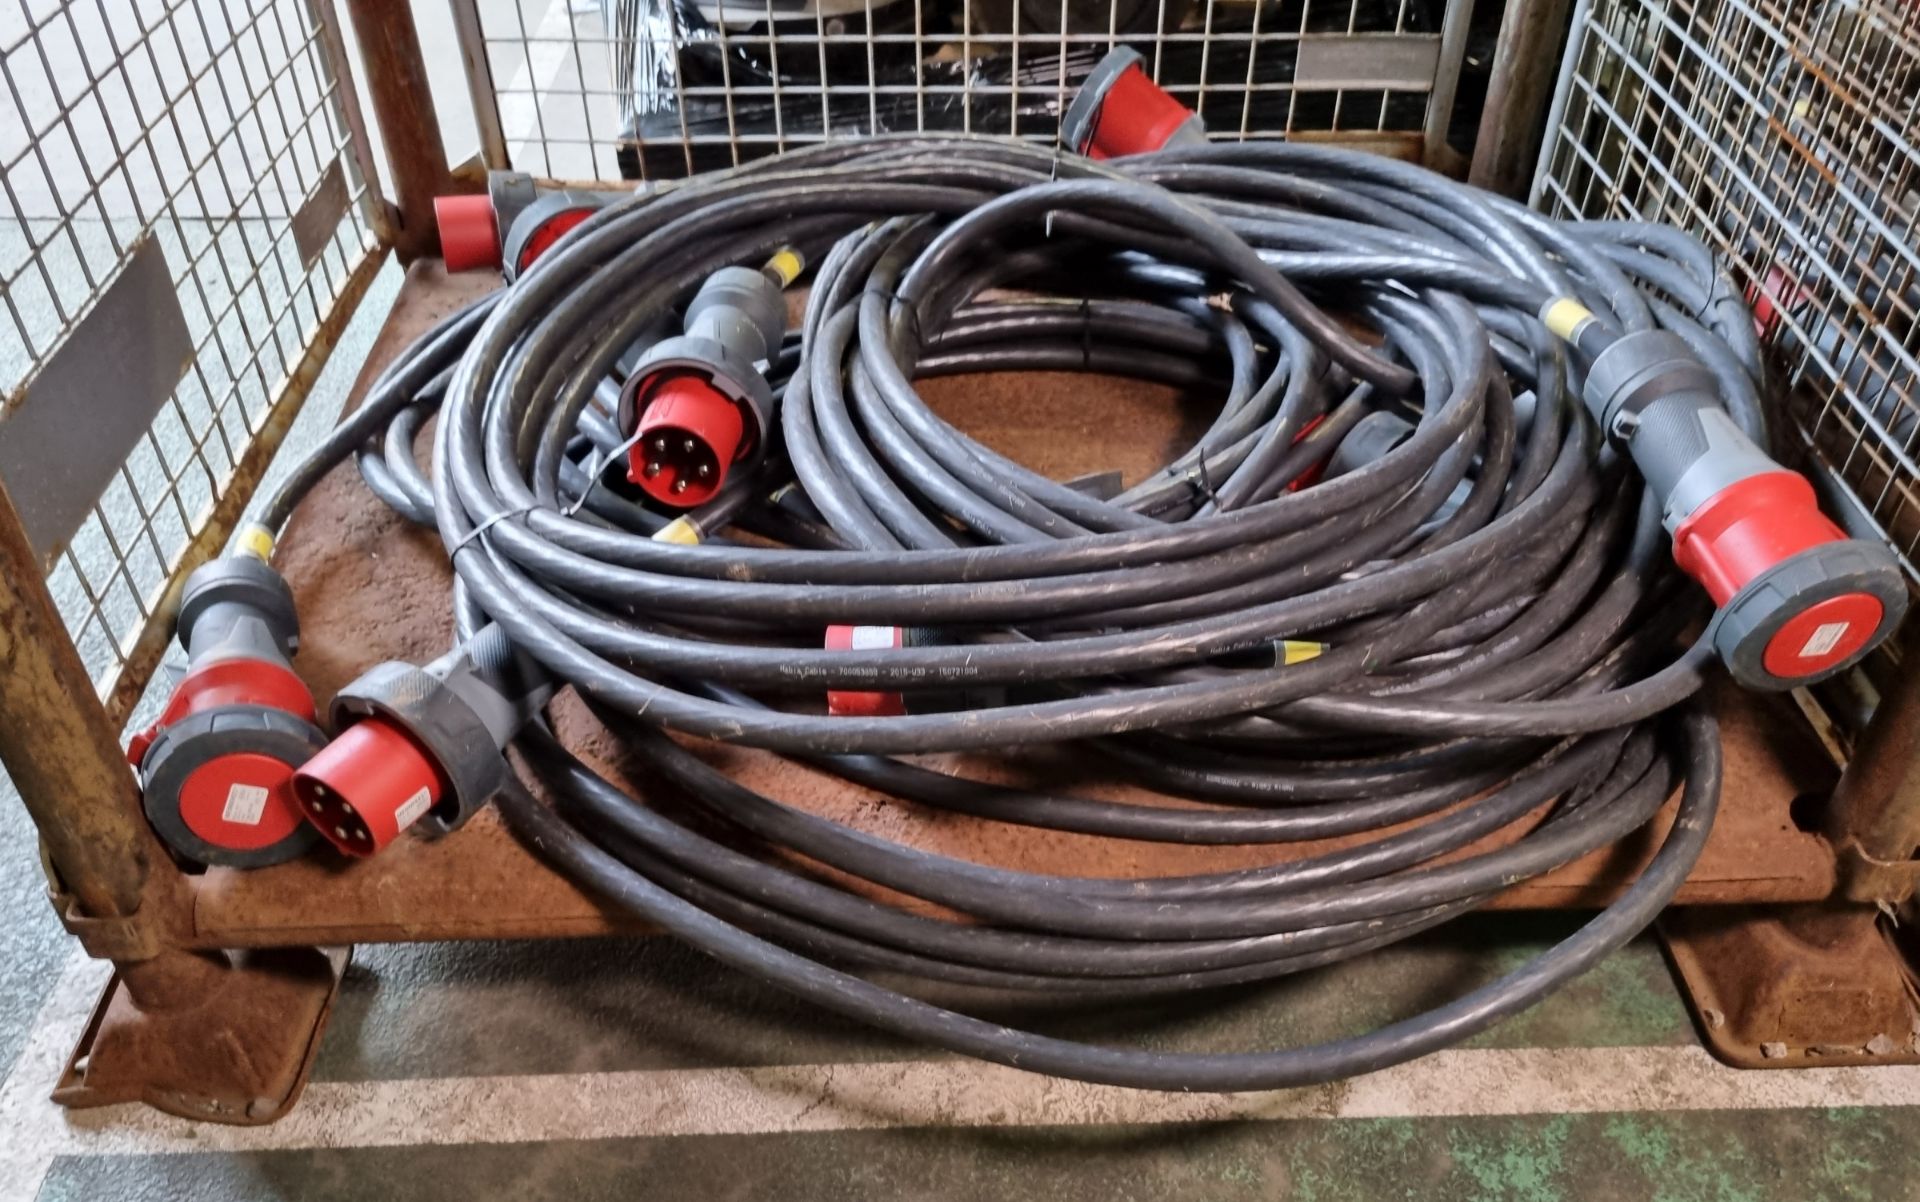 5x Mennekes PowerTOP Xtra 63a 400vac 3 Phase Power Harness heavy duty cables 15m - Image 2 of 3